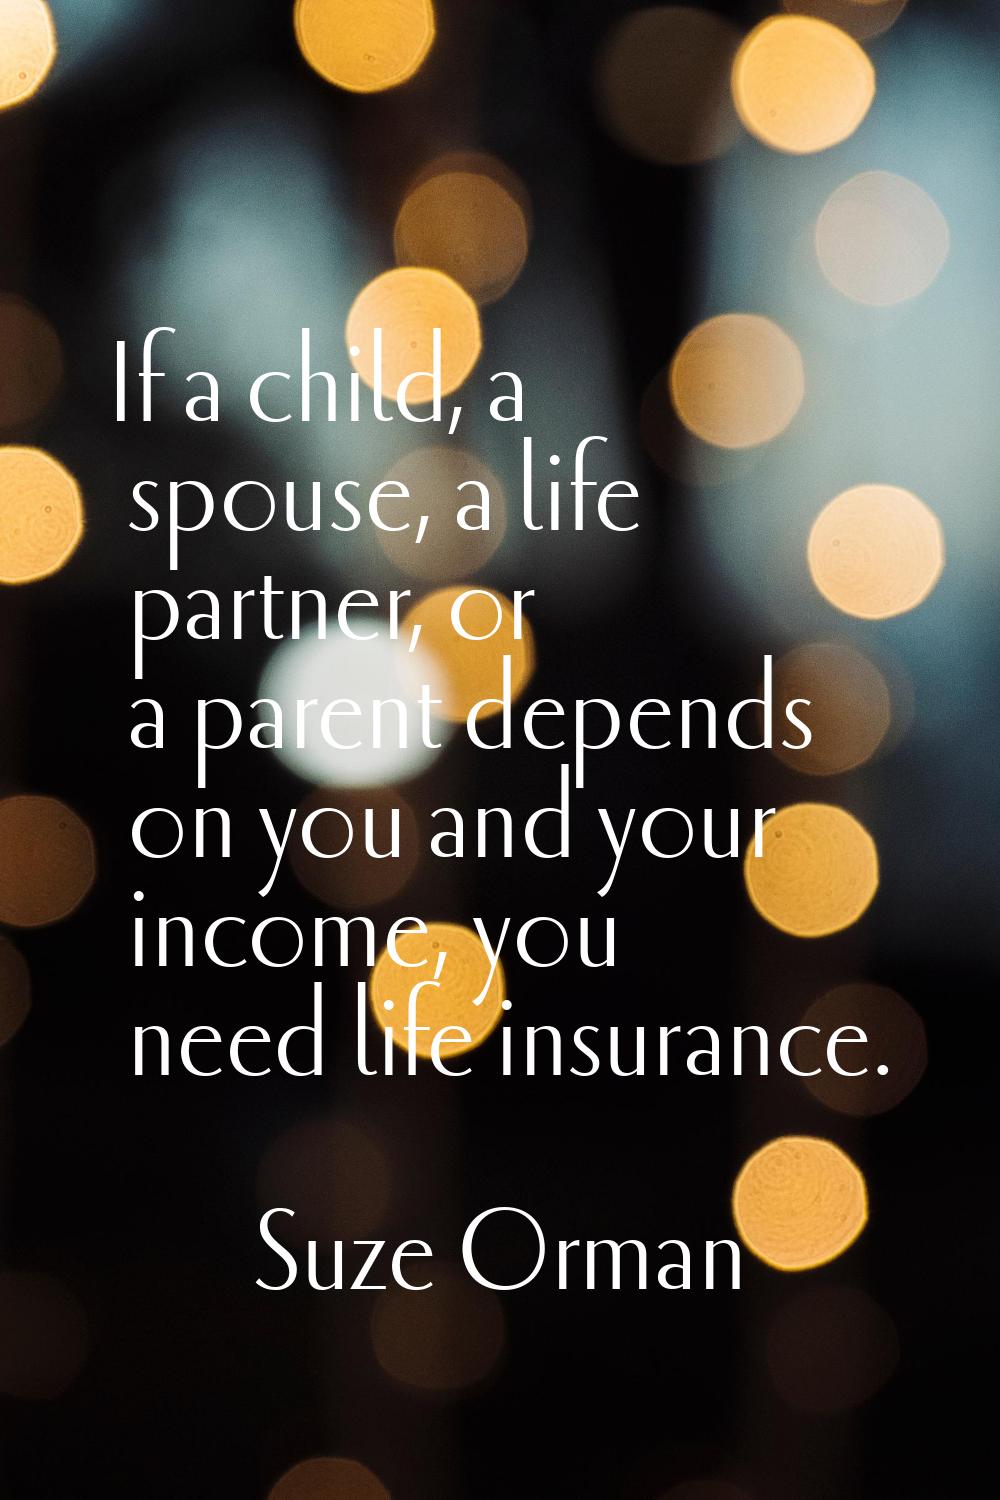 If a child, a spouse, a life partner, or a parent depends on you and your income, you need life ins